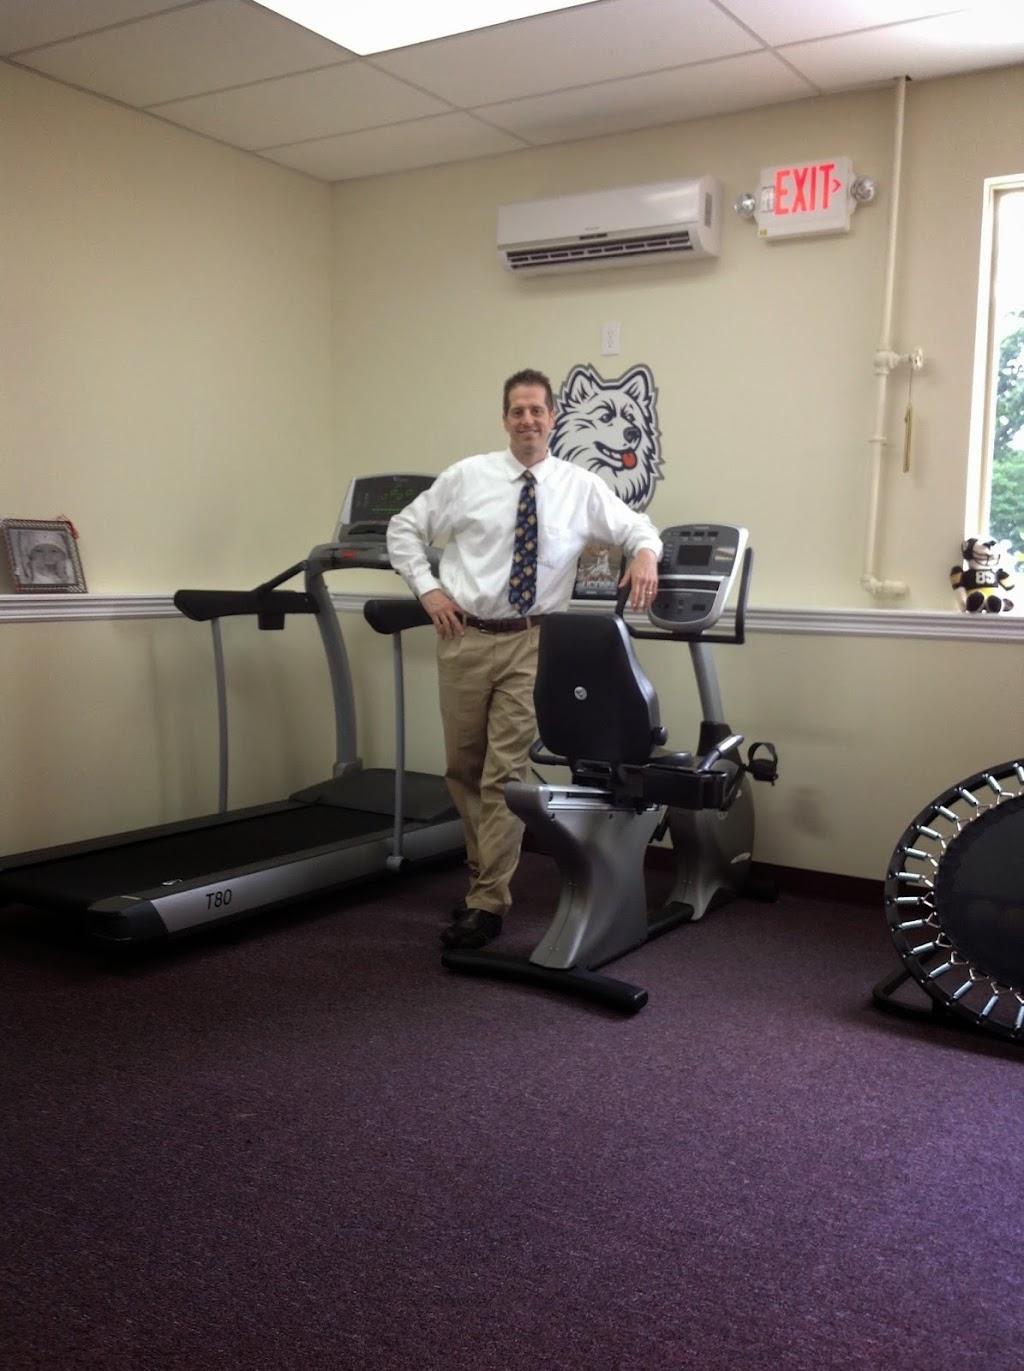 Symmetry Physical Therapy | 270 Main St, Portland, CT 06480 | Phone: (860) 788-7976